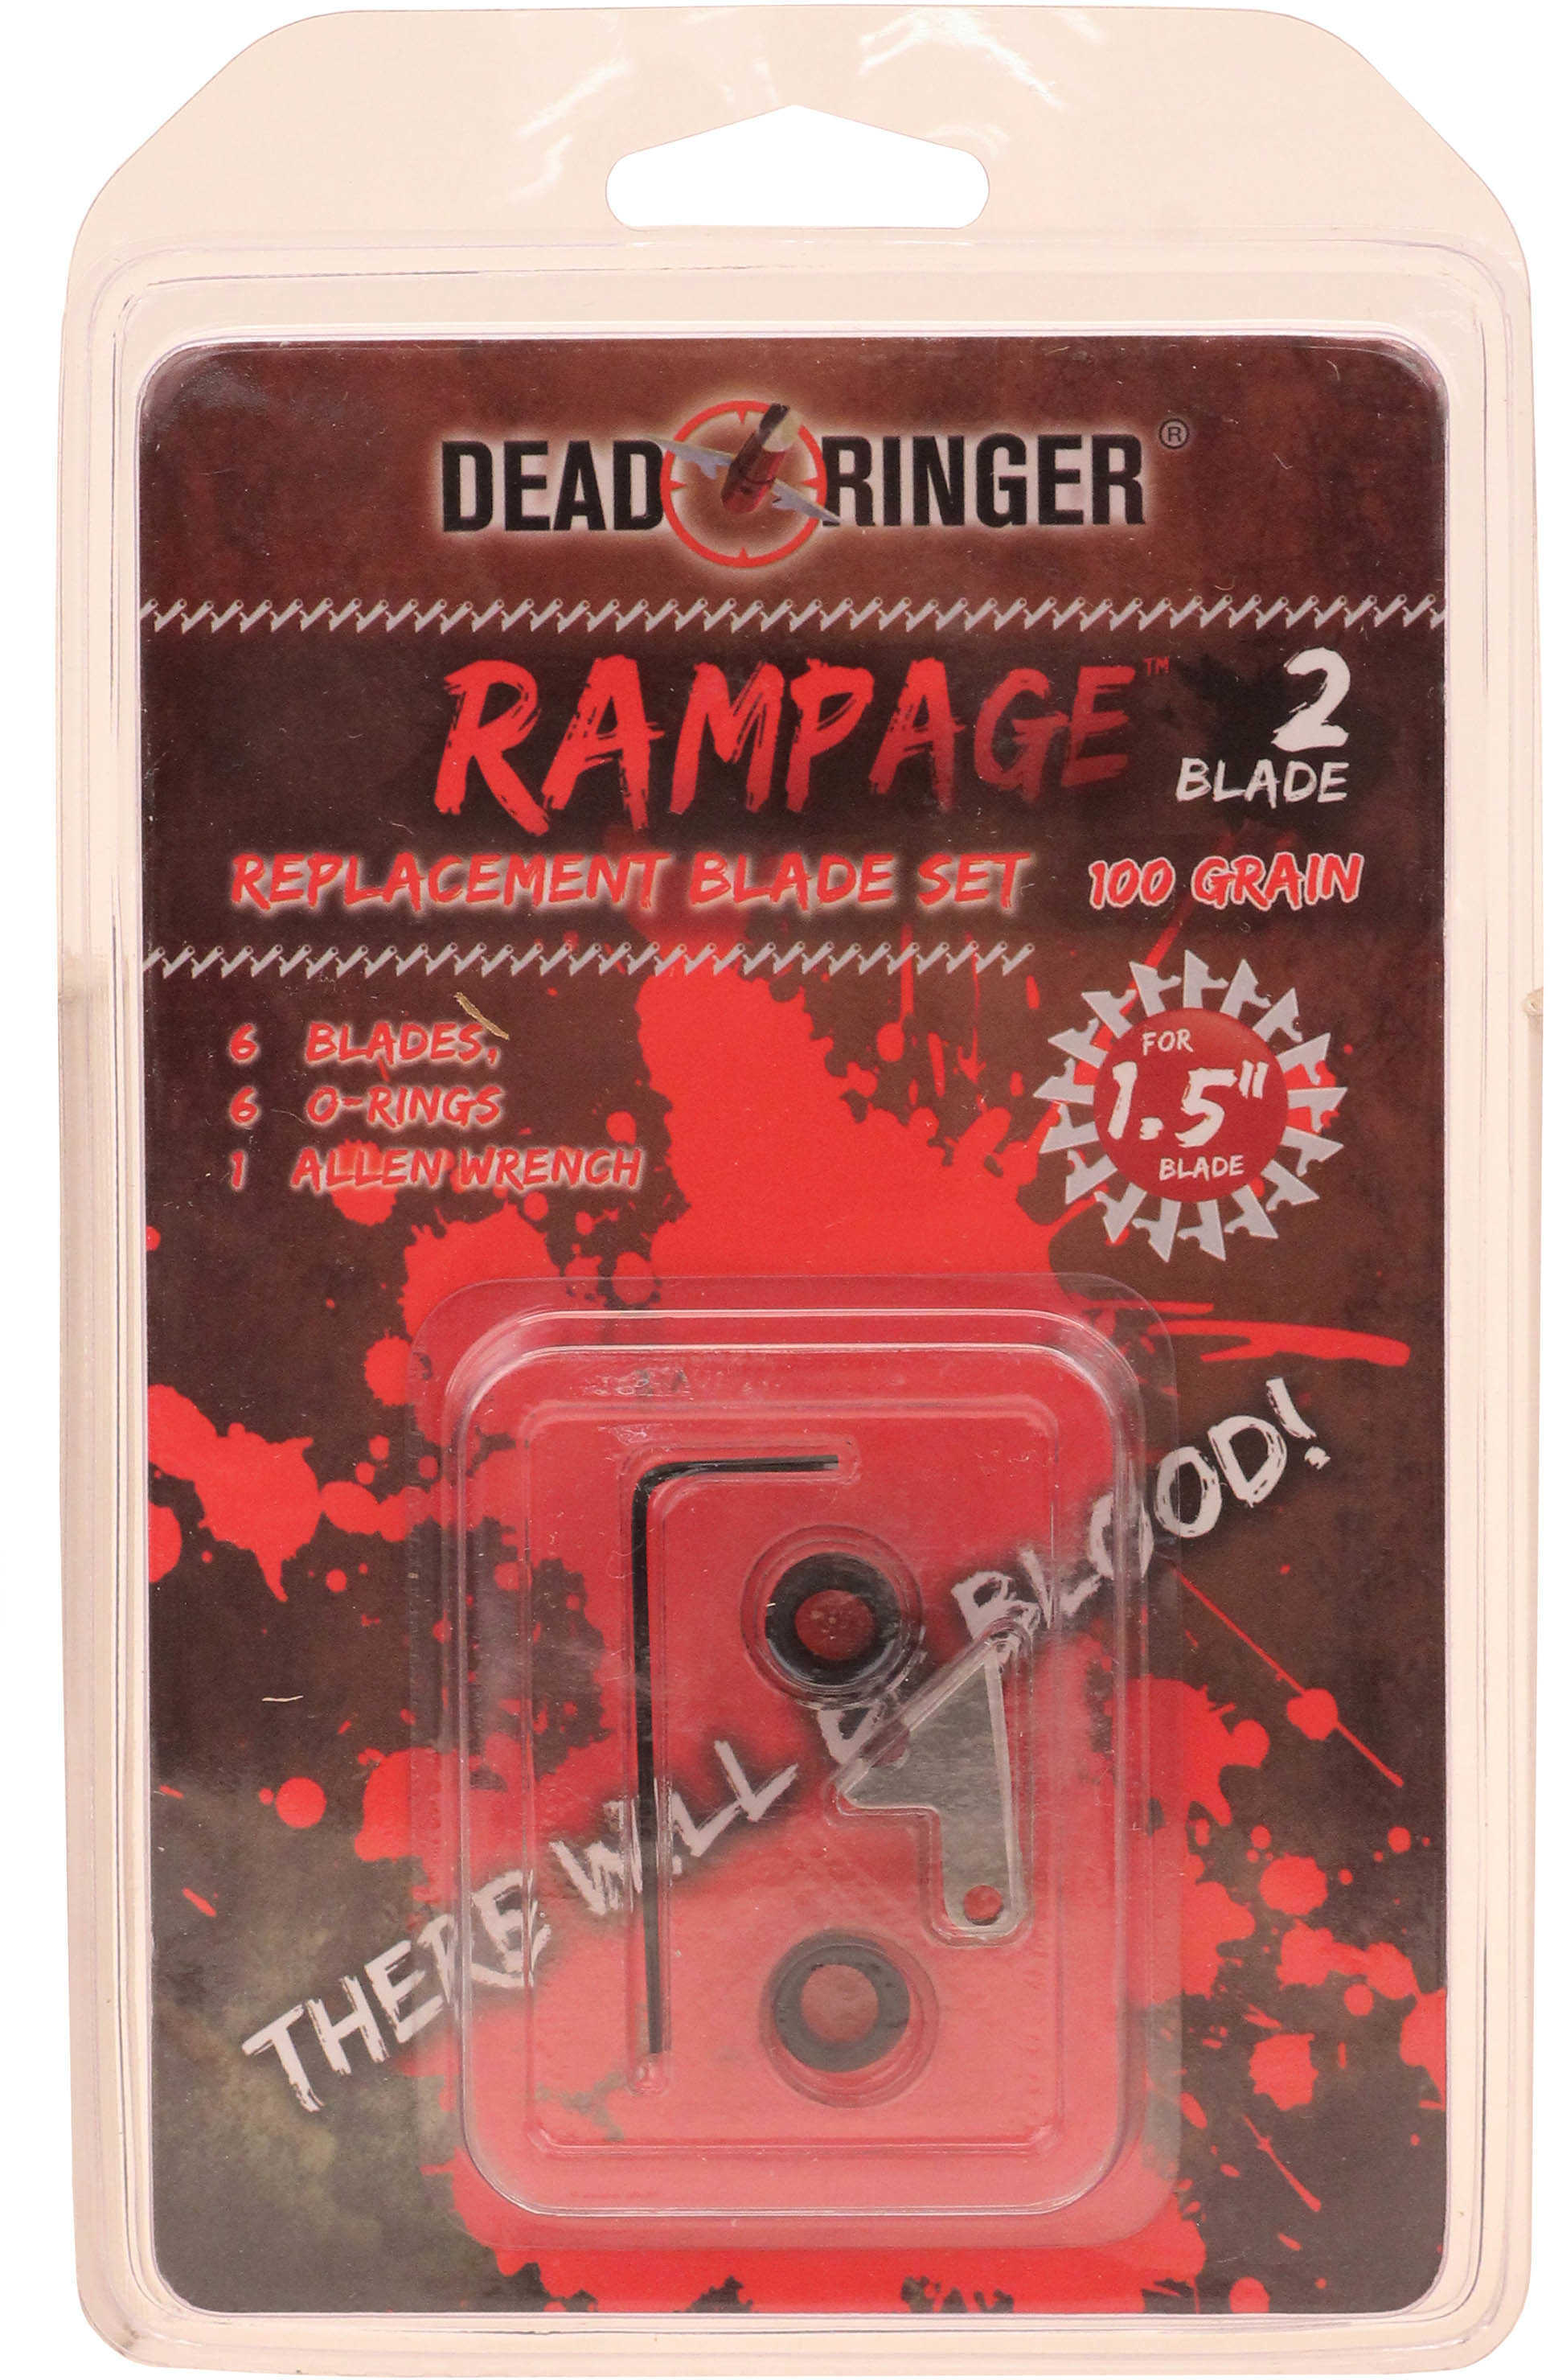 Dead Ringer Rampage 100 grain 2 Blade 1.5" Replacement DR4736